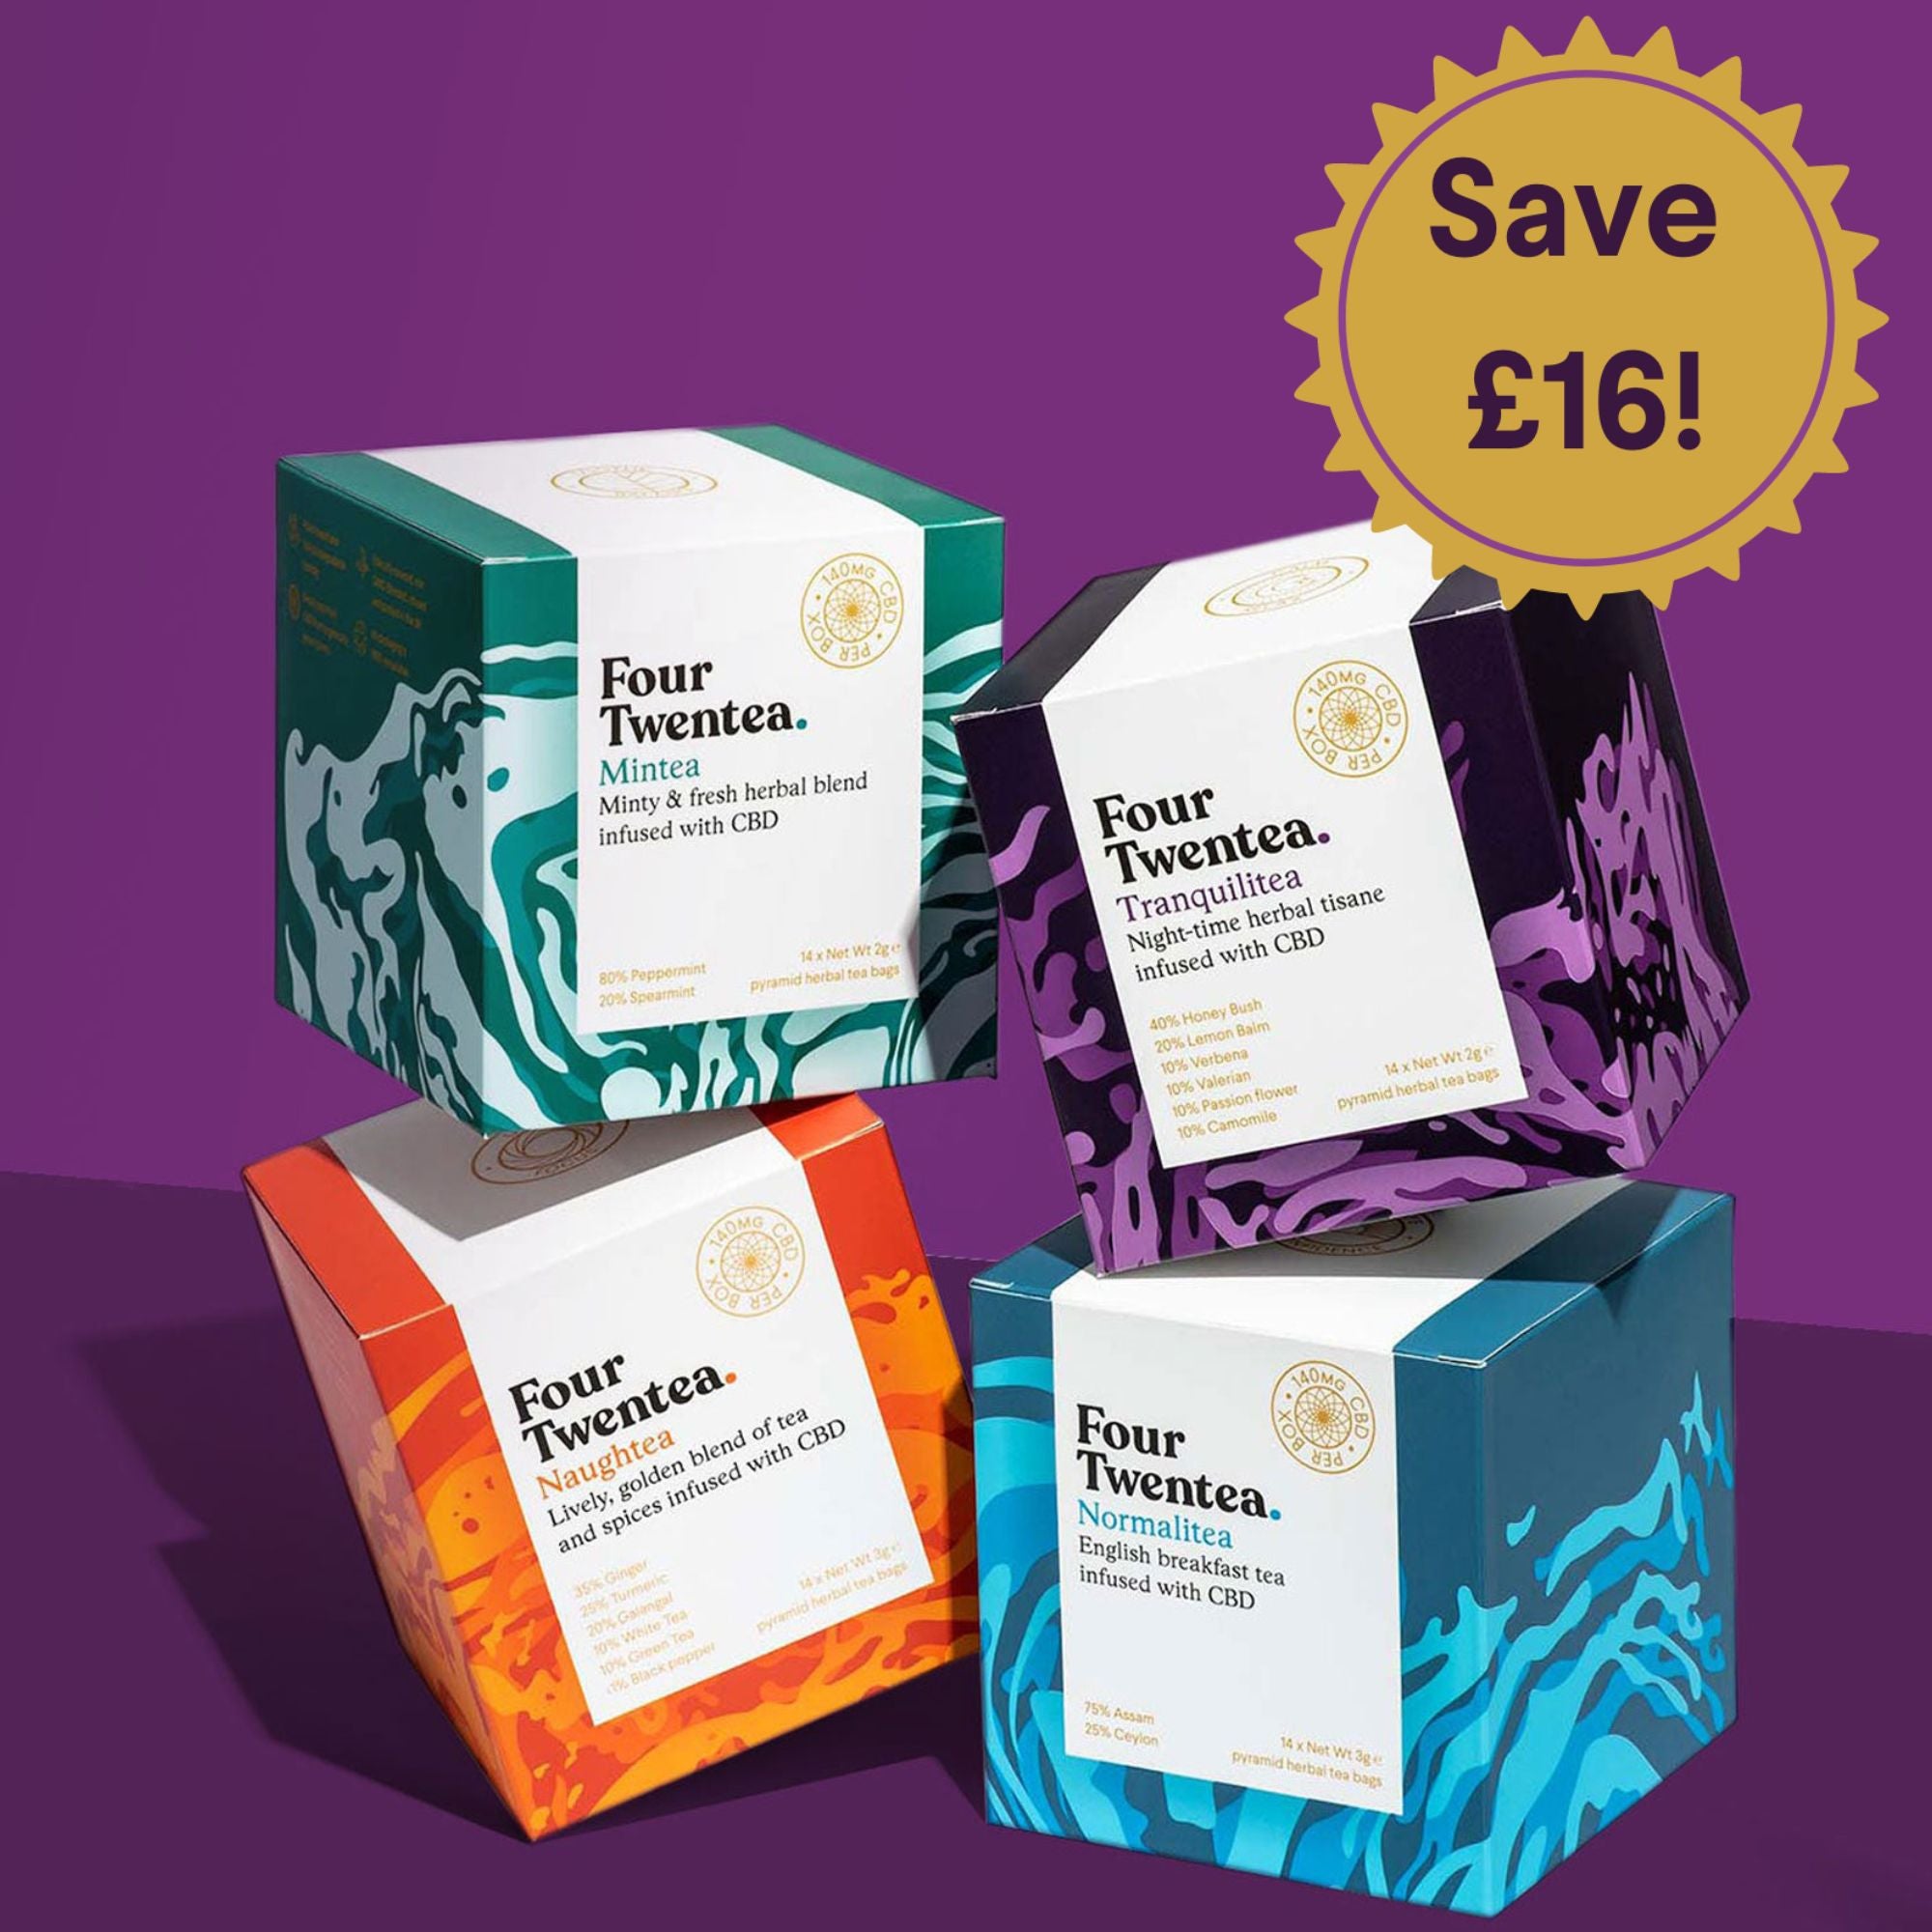 All four CBD tea blends with the £16 off offer sticker on